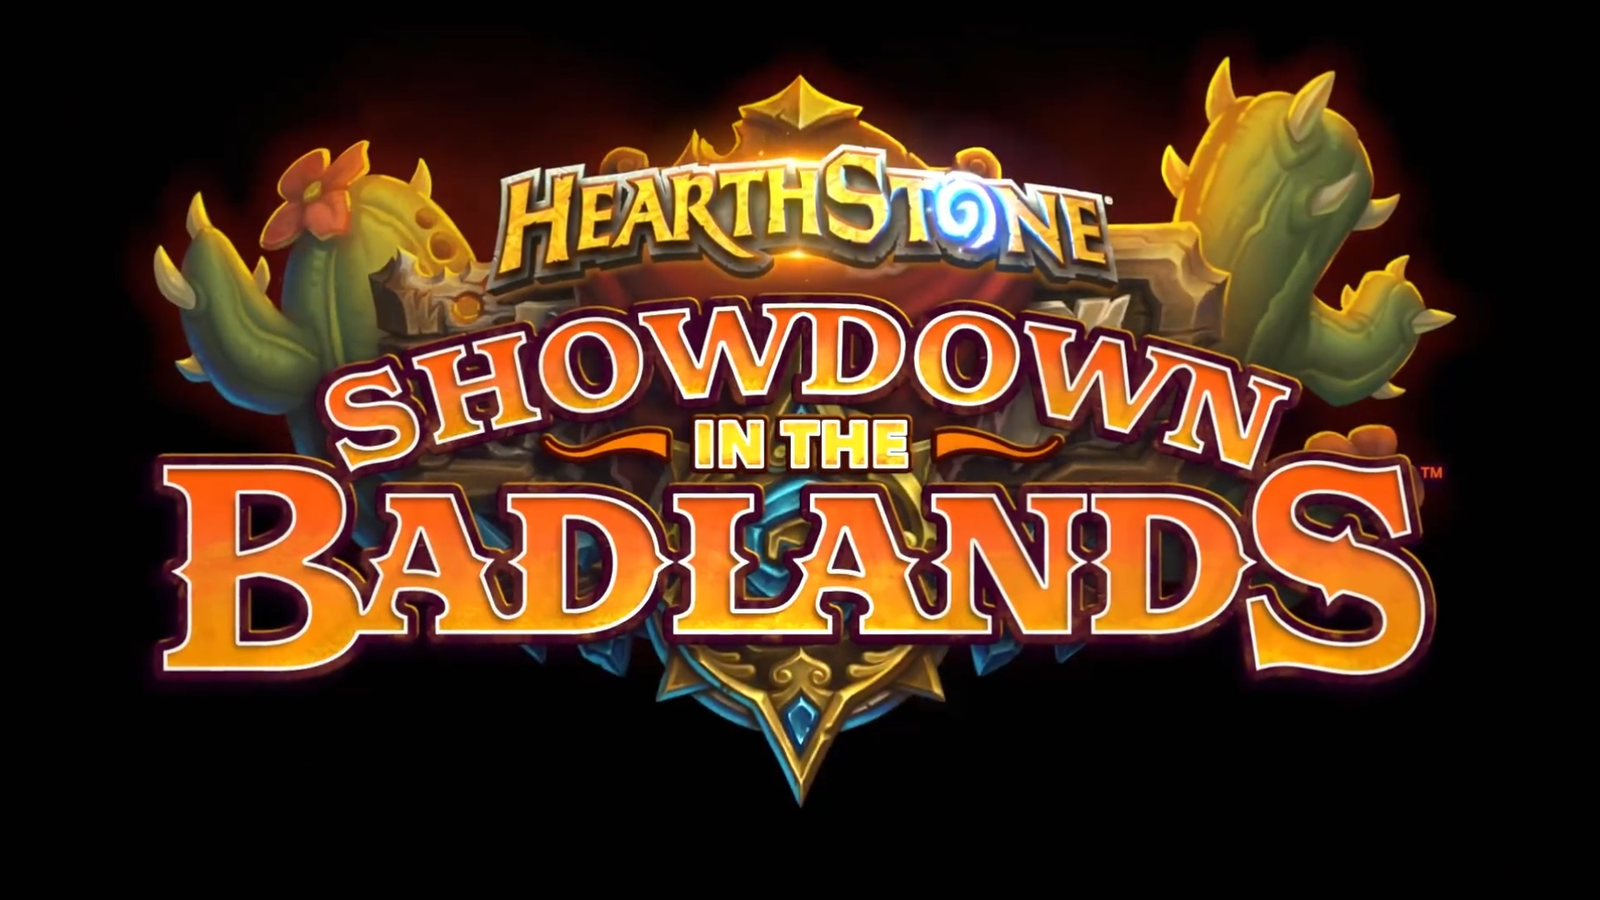 Hearthstone: Showdown in the Badlands - Official Cinematic Trailer 